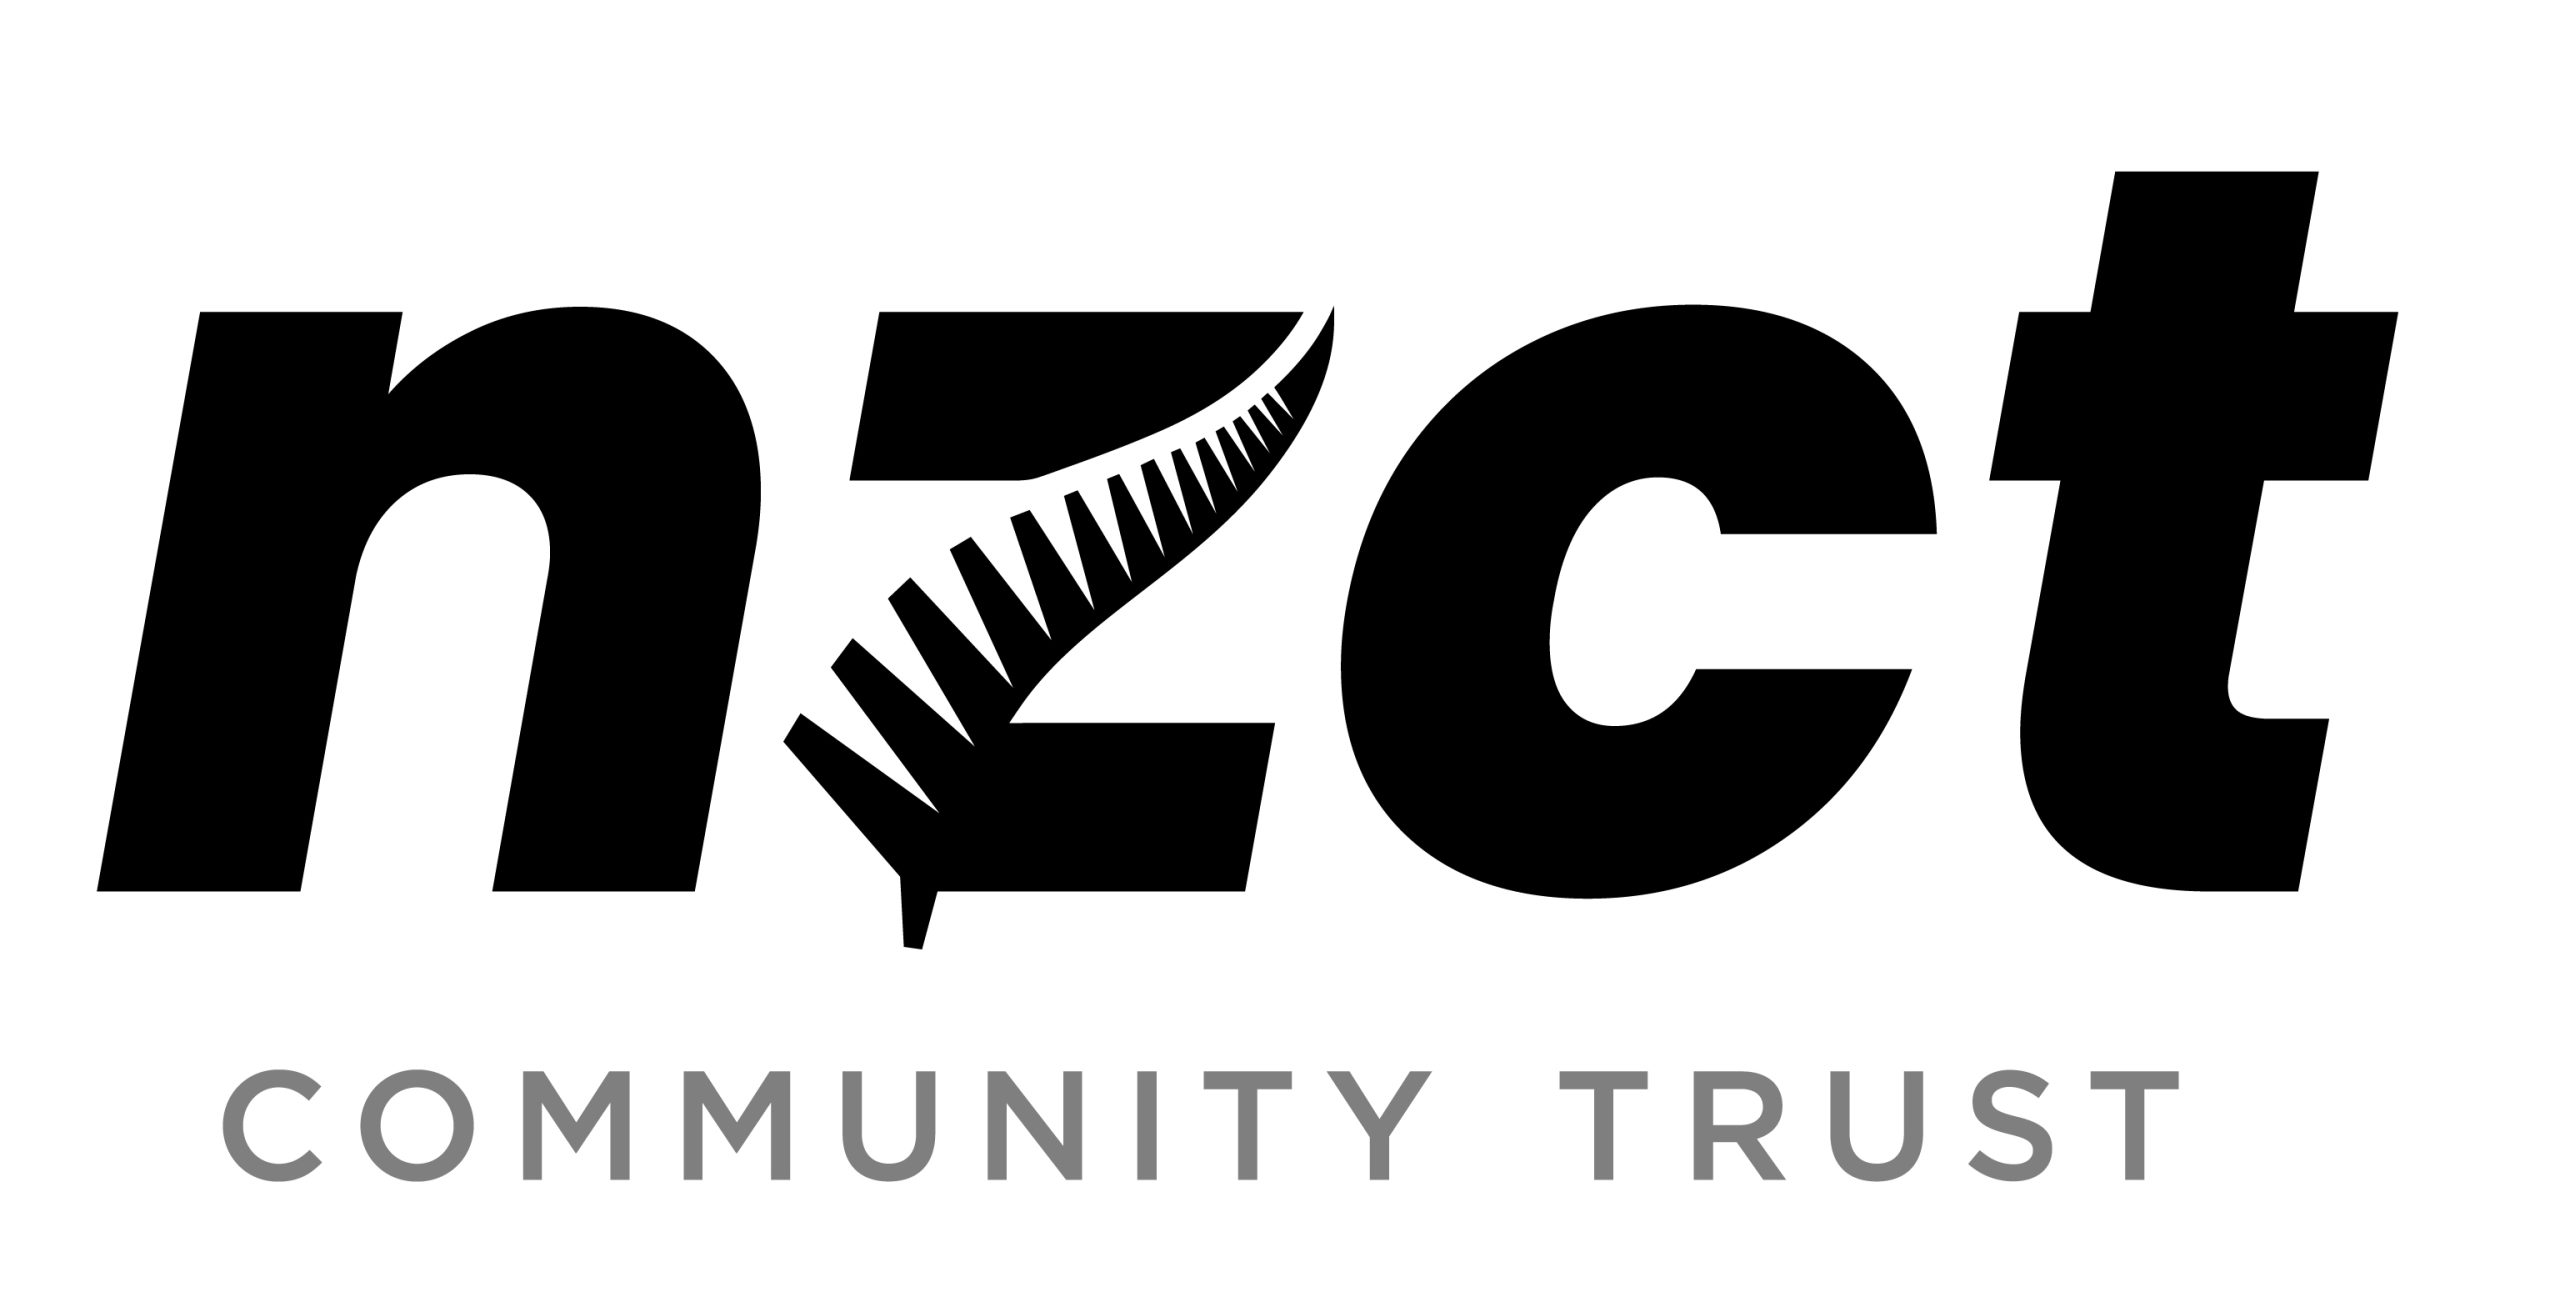 Thank you to NZCT!